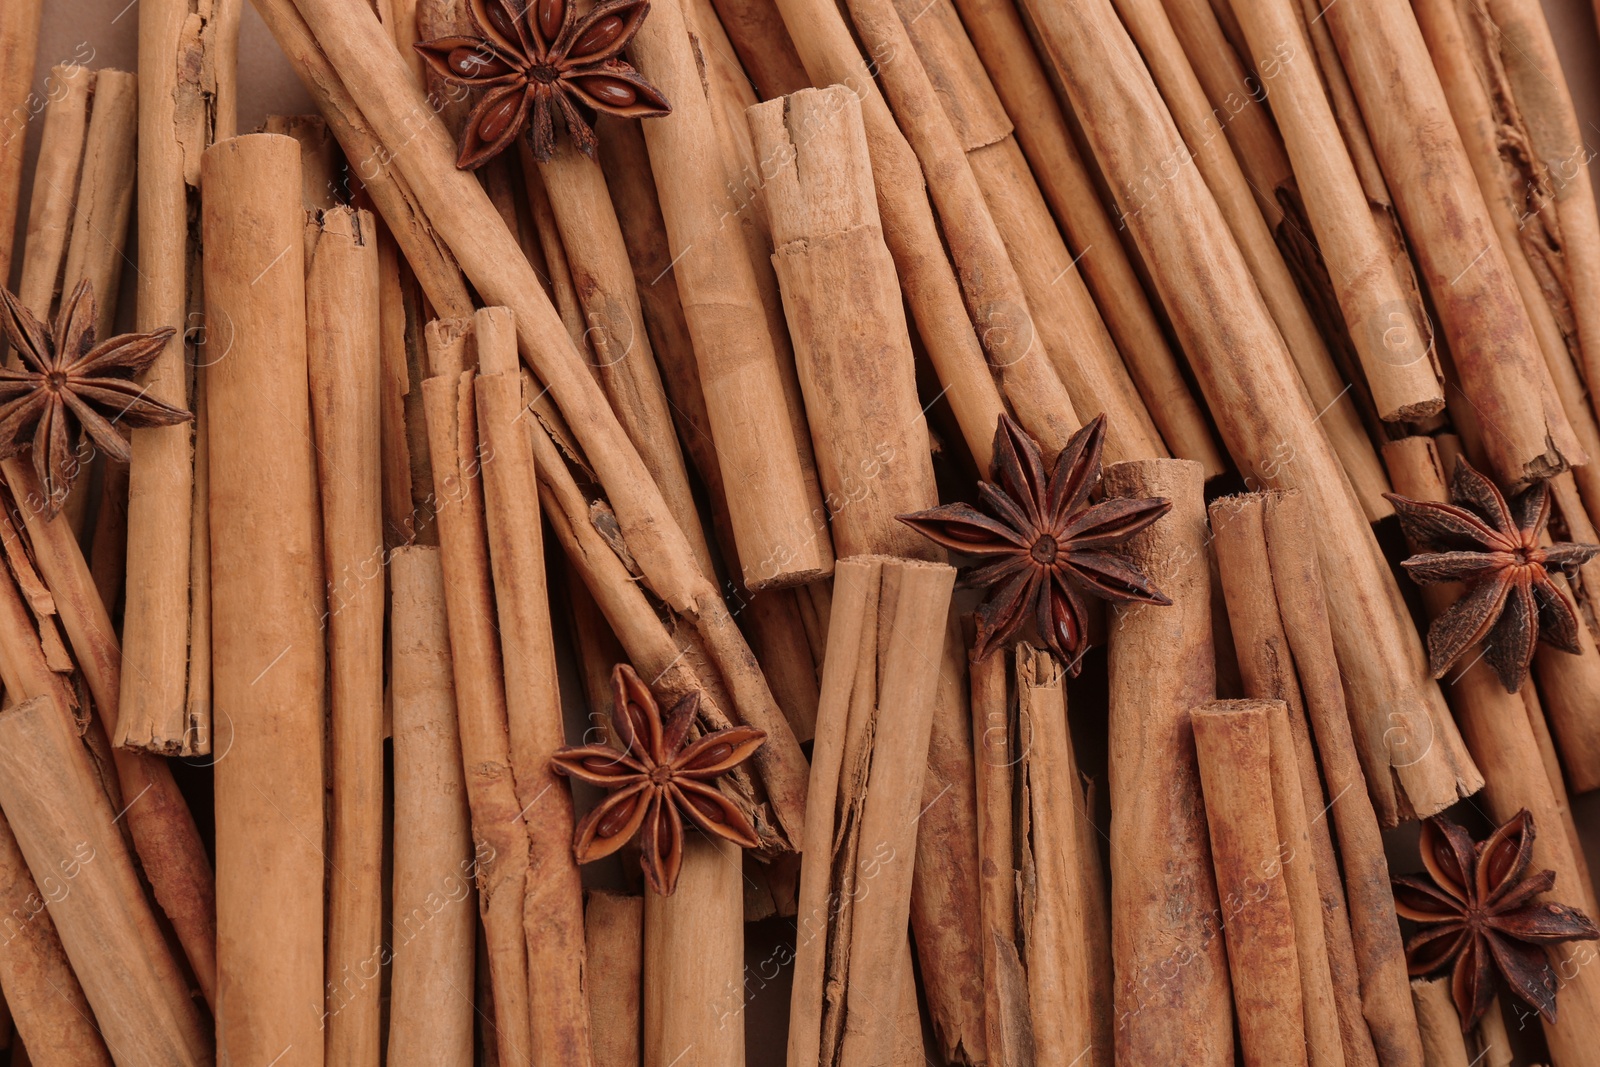 Photo of Aromatic cinnamon sticks and anise as background, top view